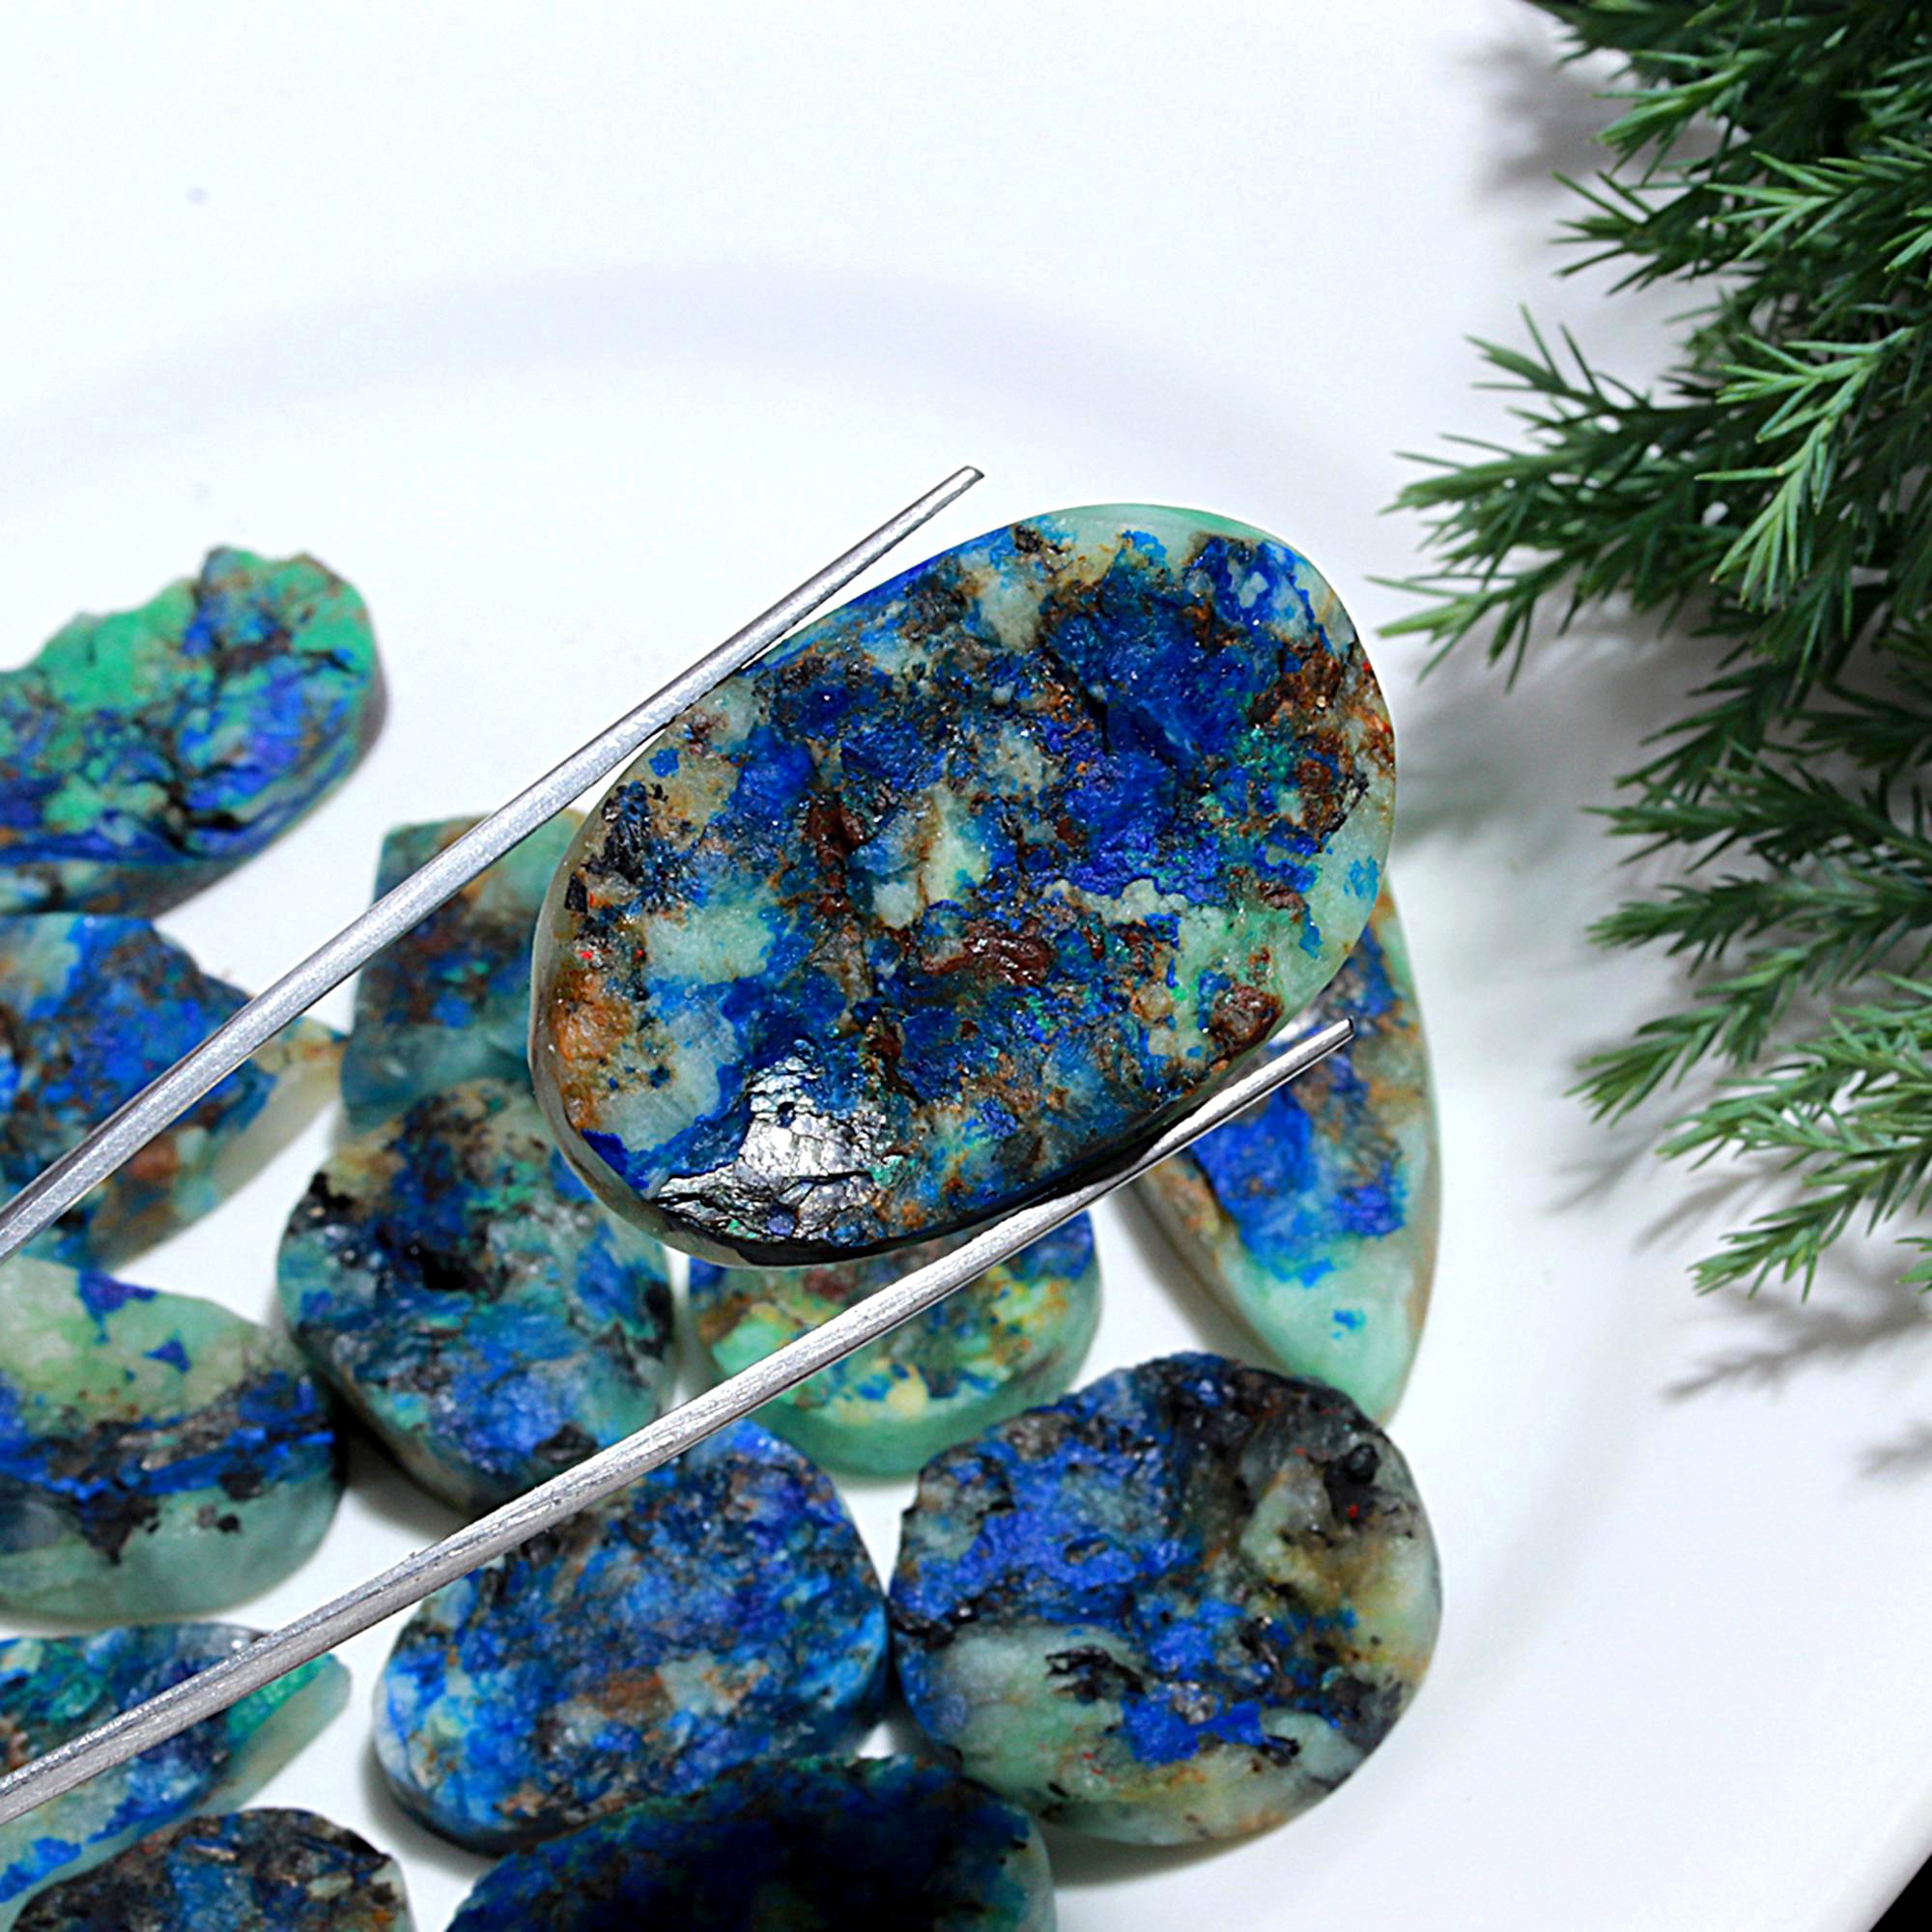 15 Pcs 618.Cts Natural Azurite Druzy Unpolished Loose Cabochon Gemstone For Jewelry Wholesale Lot Size 48x18 22x23mm#1169